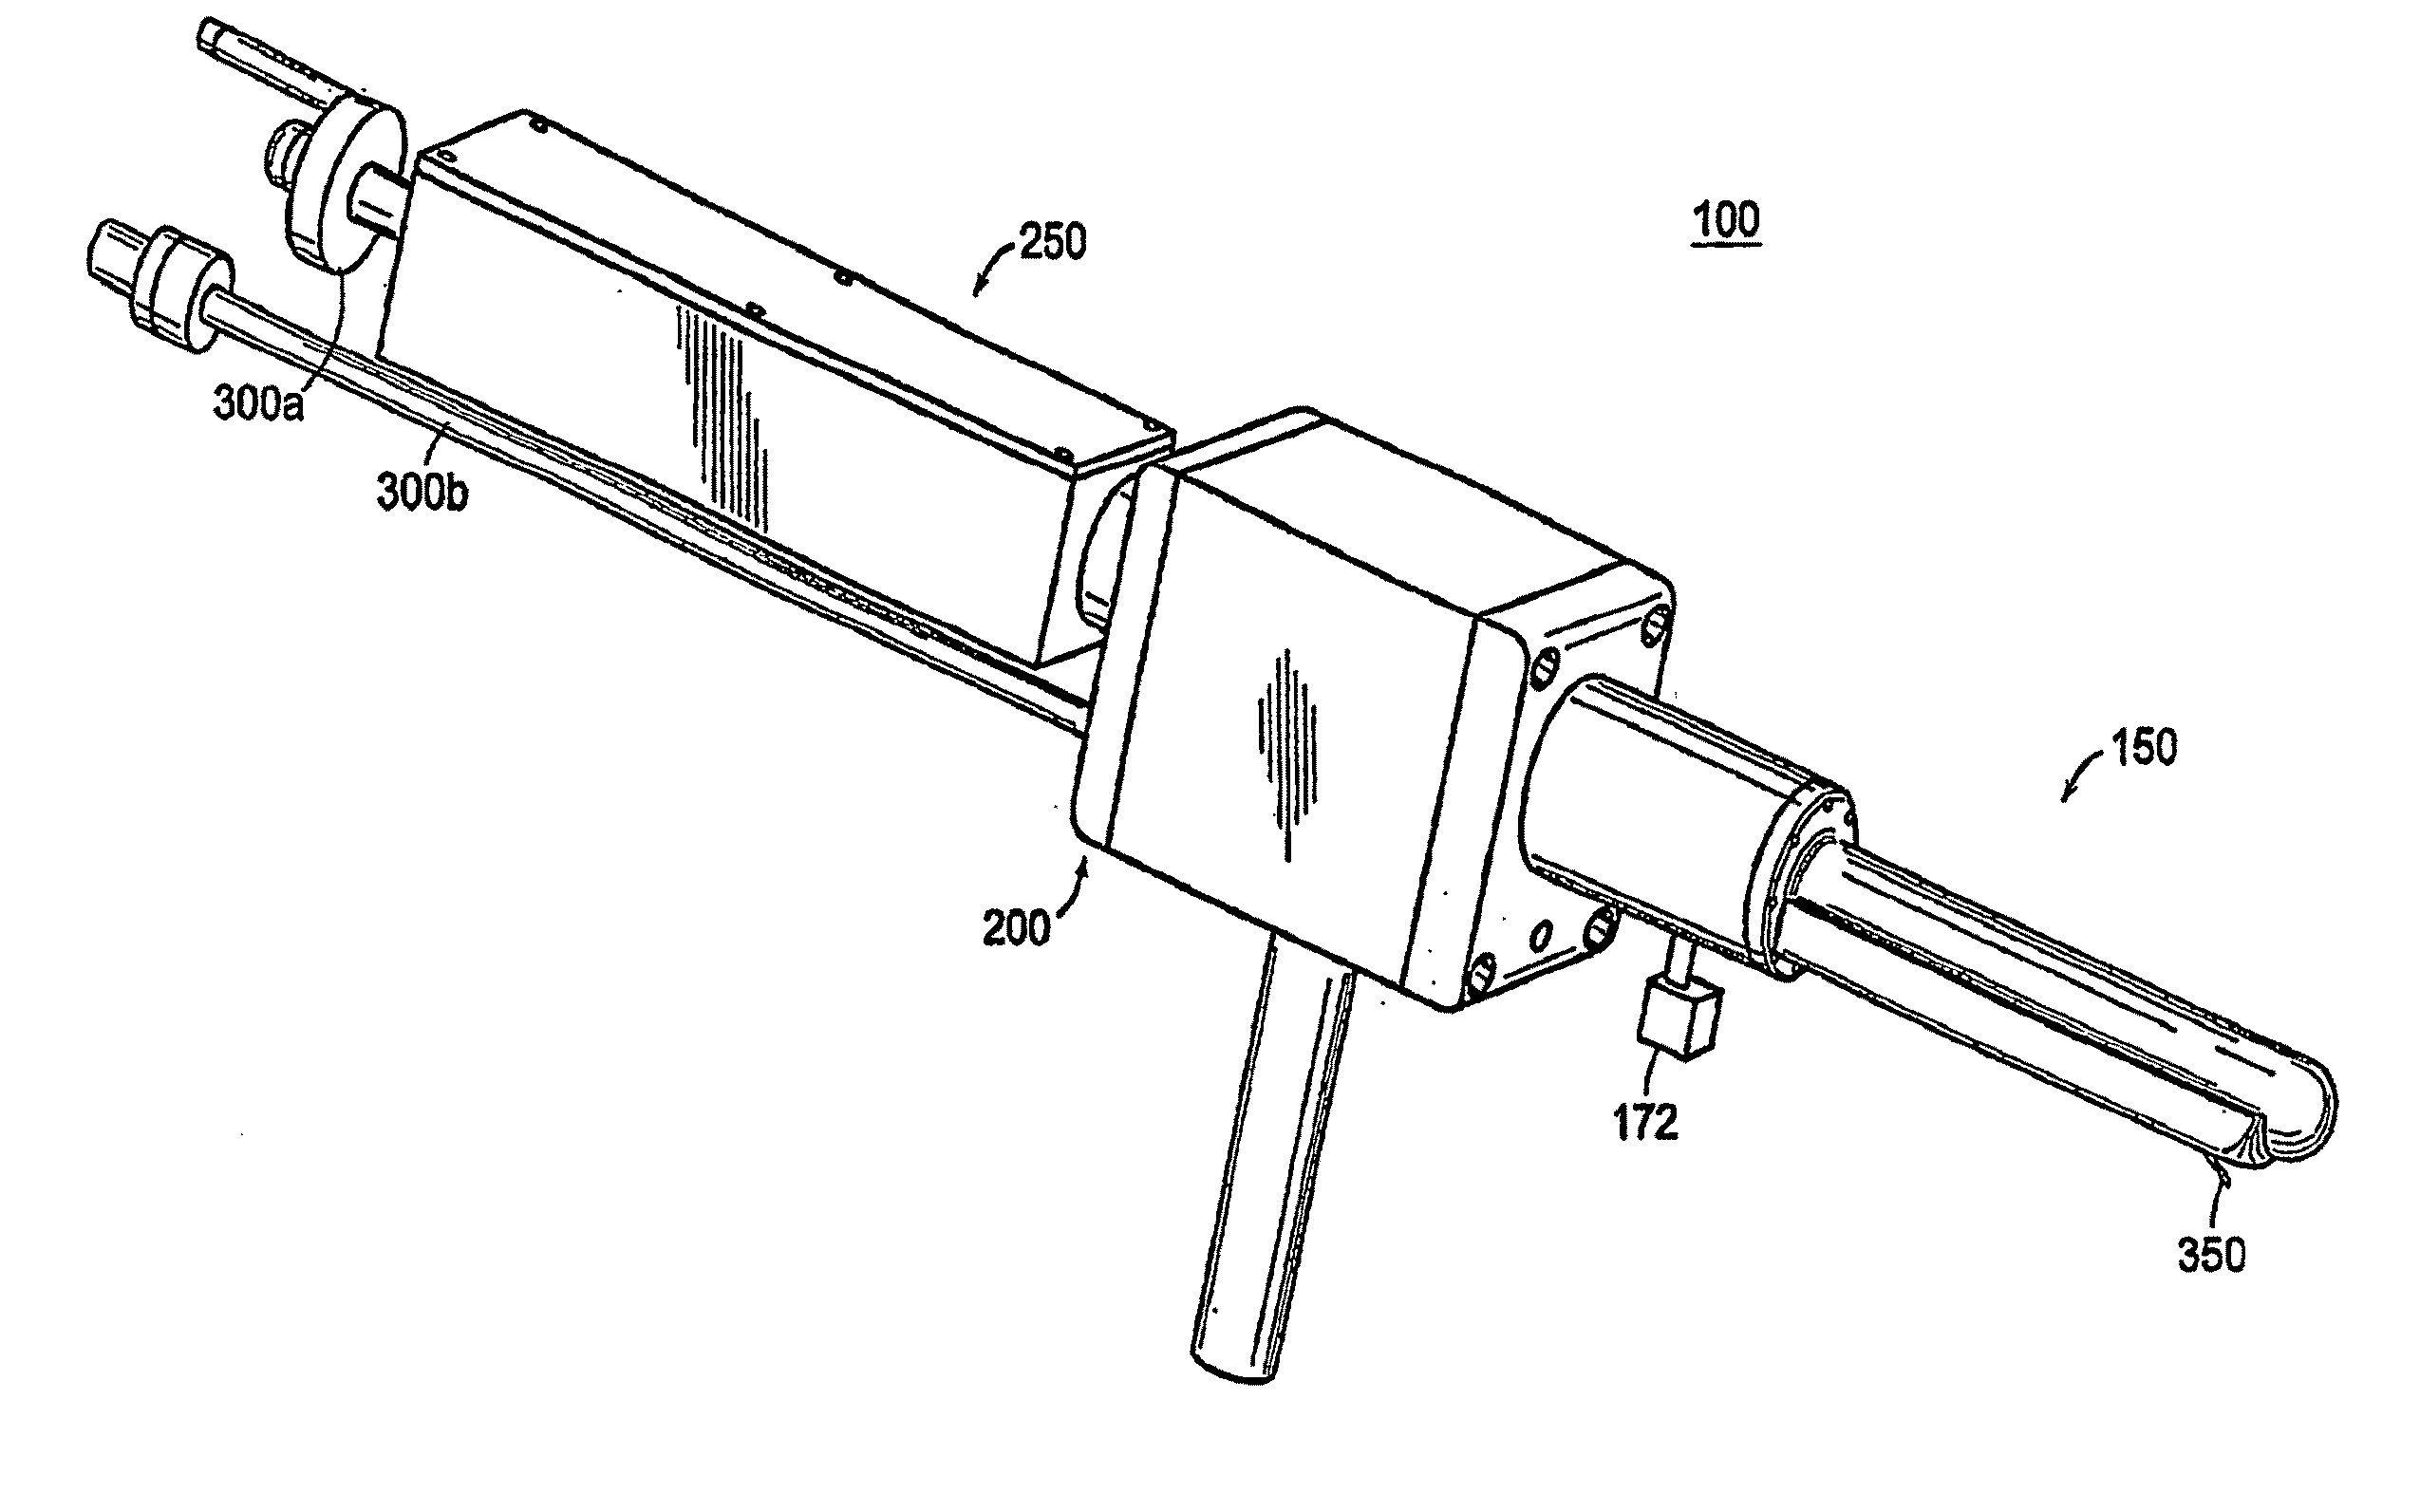 Apparatus for insertion of a medical device within a body during a medical imaging process and devices and methods related thereto